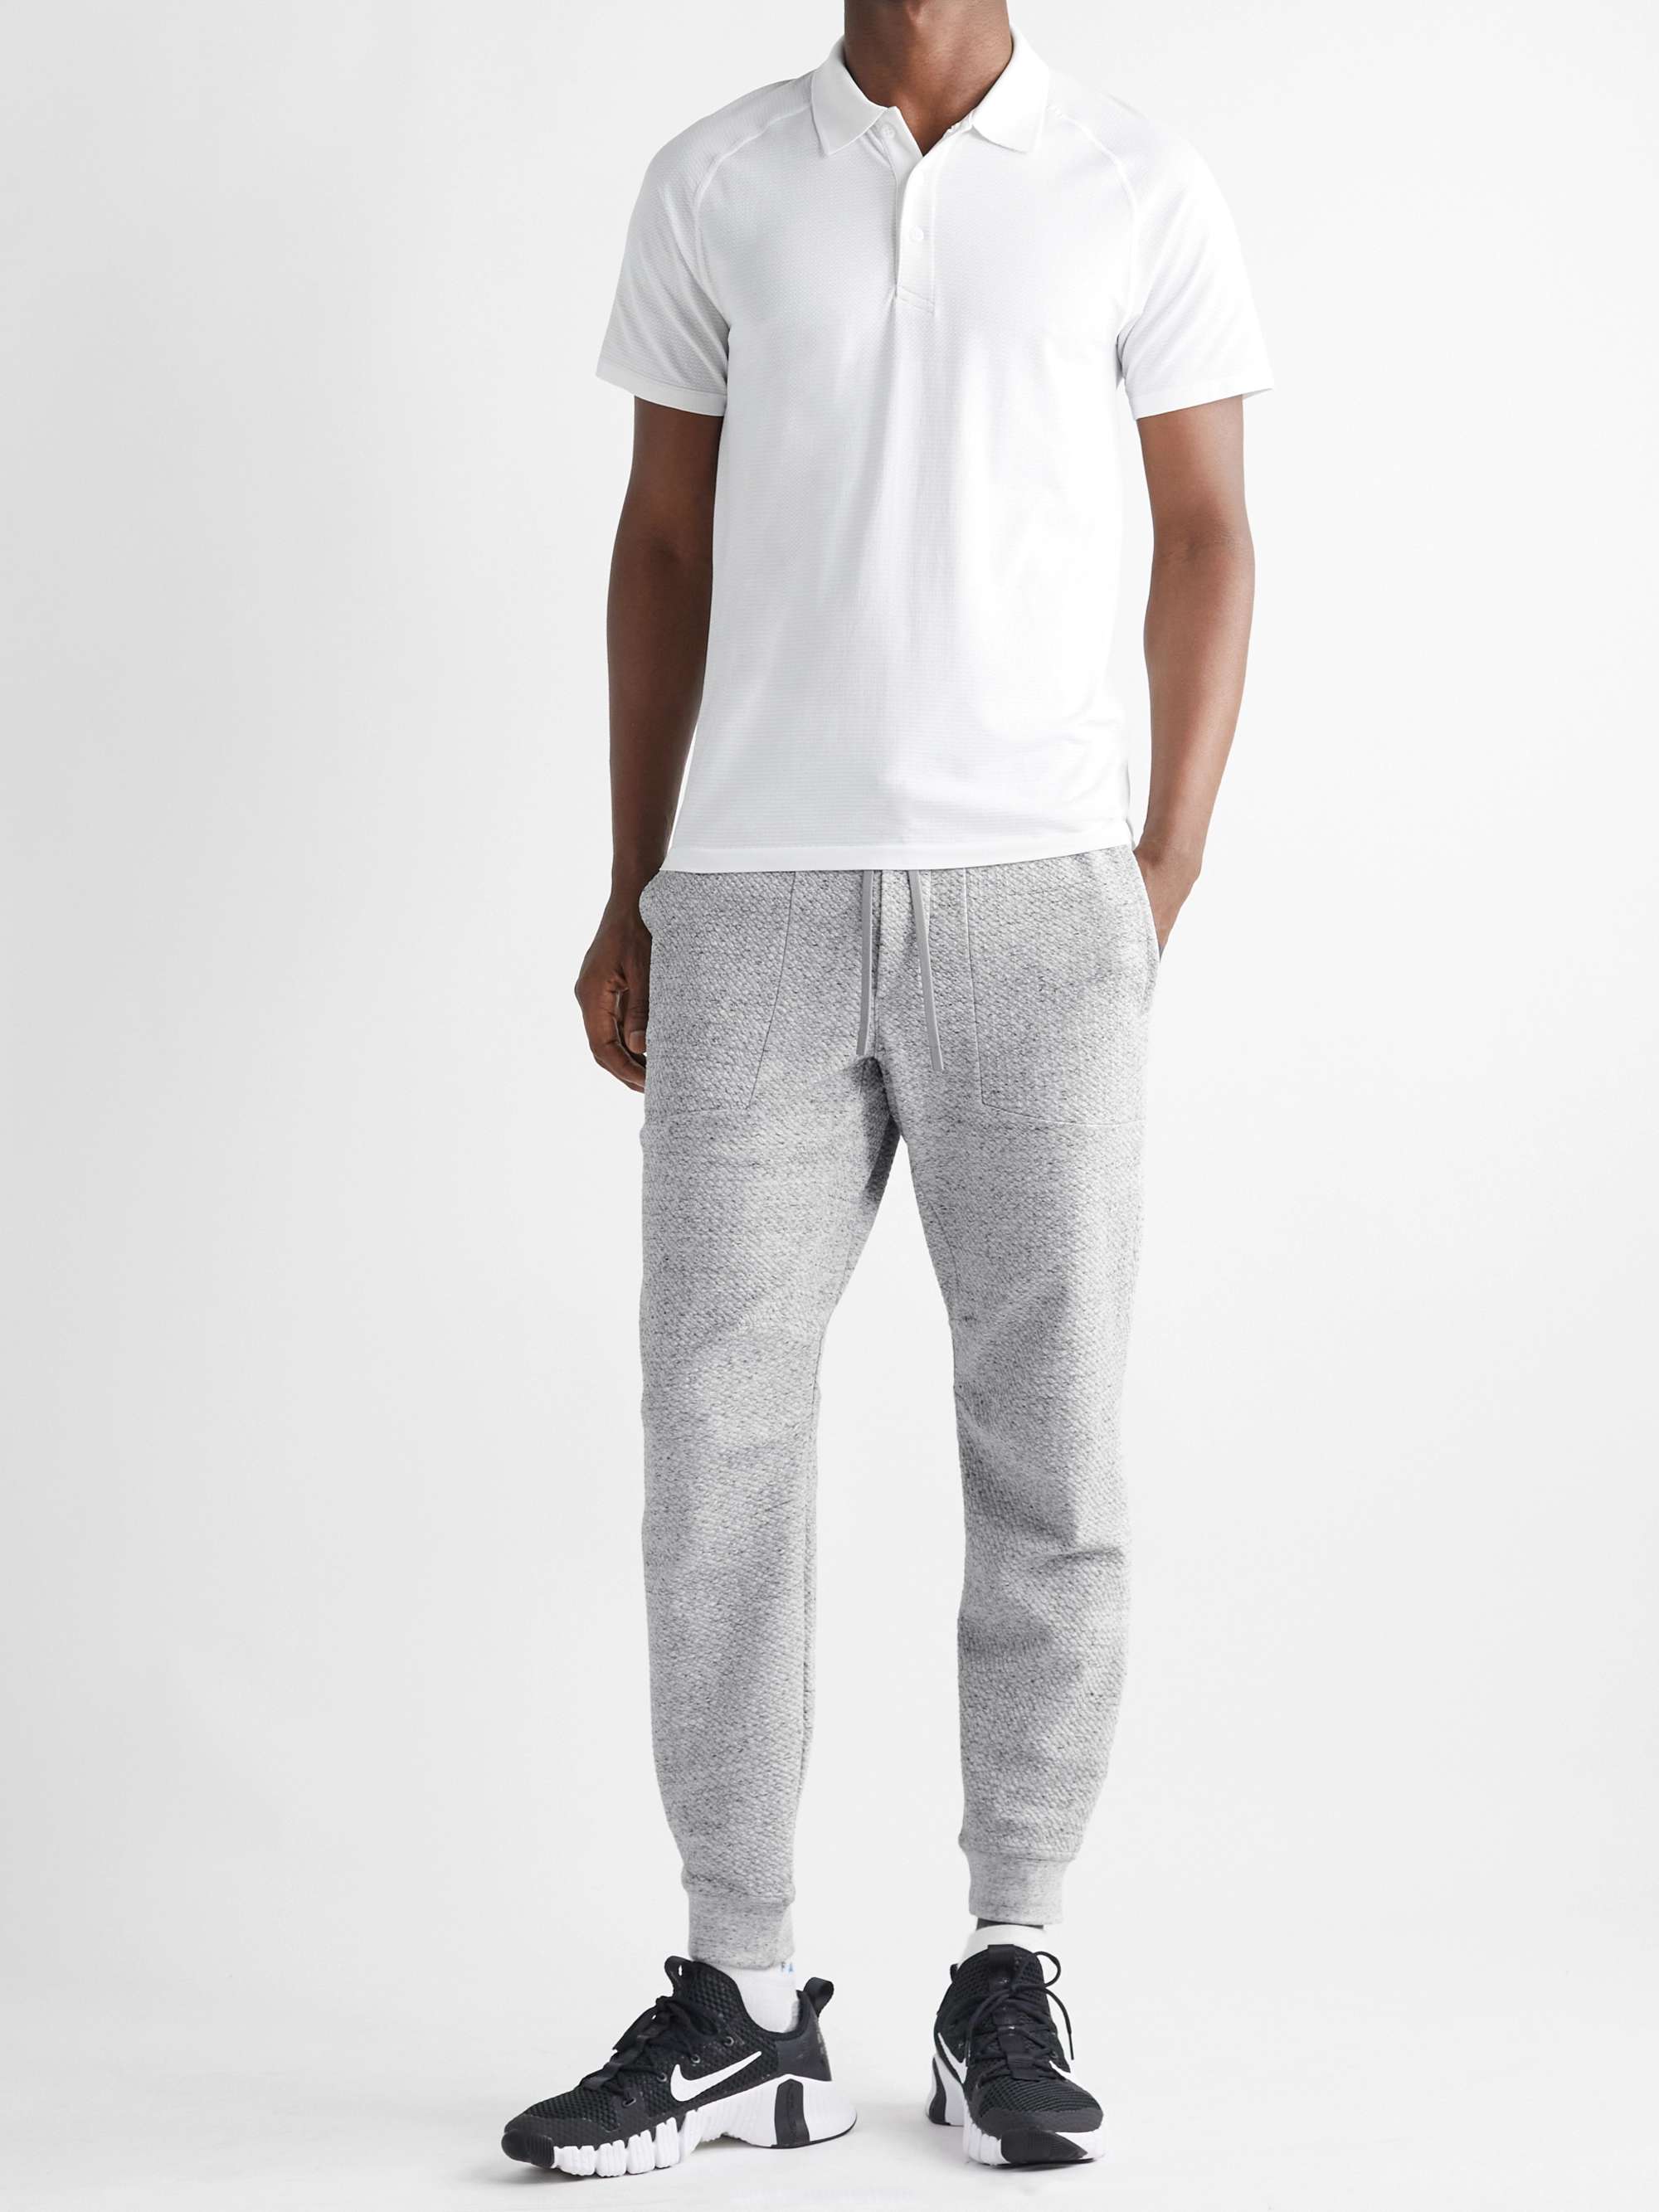 LULULEMON At Ease Tapered Textured Cotton-Blend Sweatpants